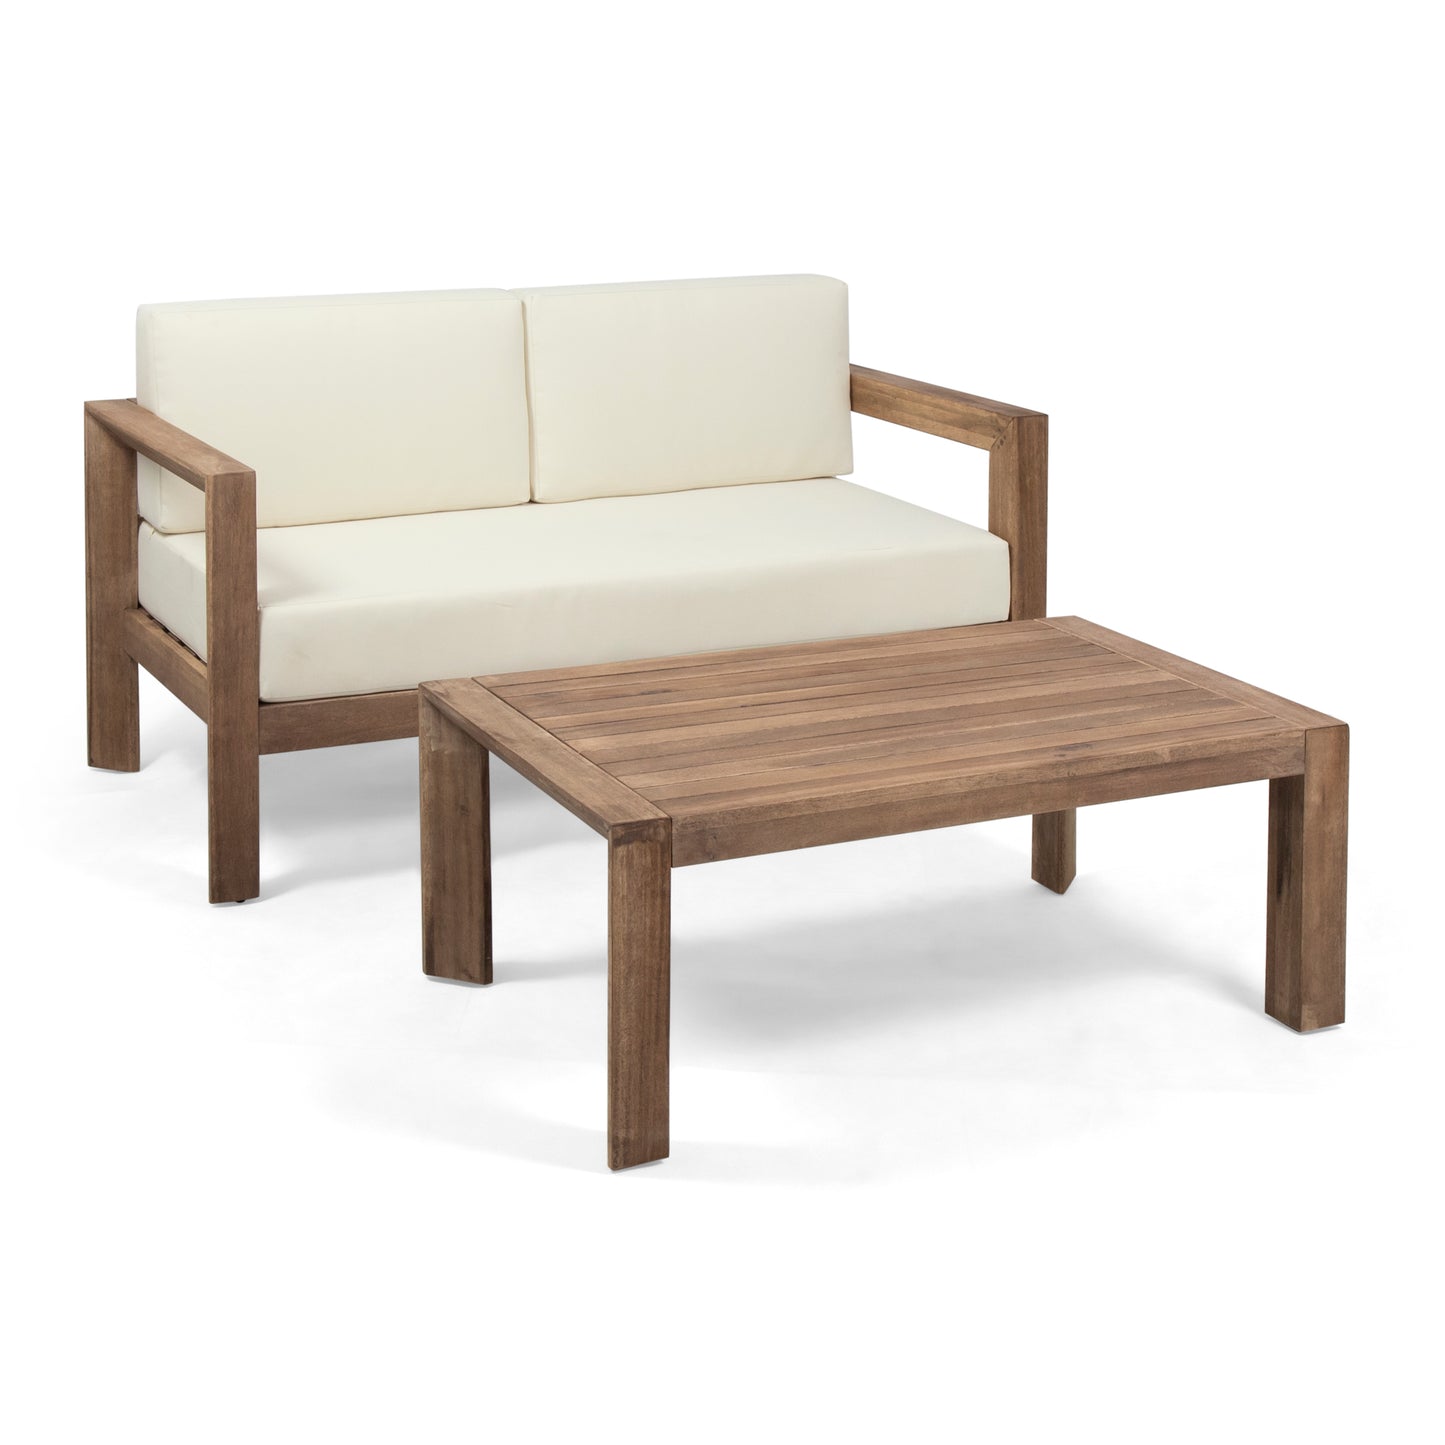 Lucia Outdoor 2 Seater Wooden Loveseat and Coffee Table Chat Set with Cushions, Beige and Brown Finish